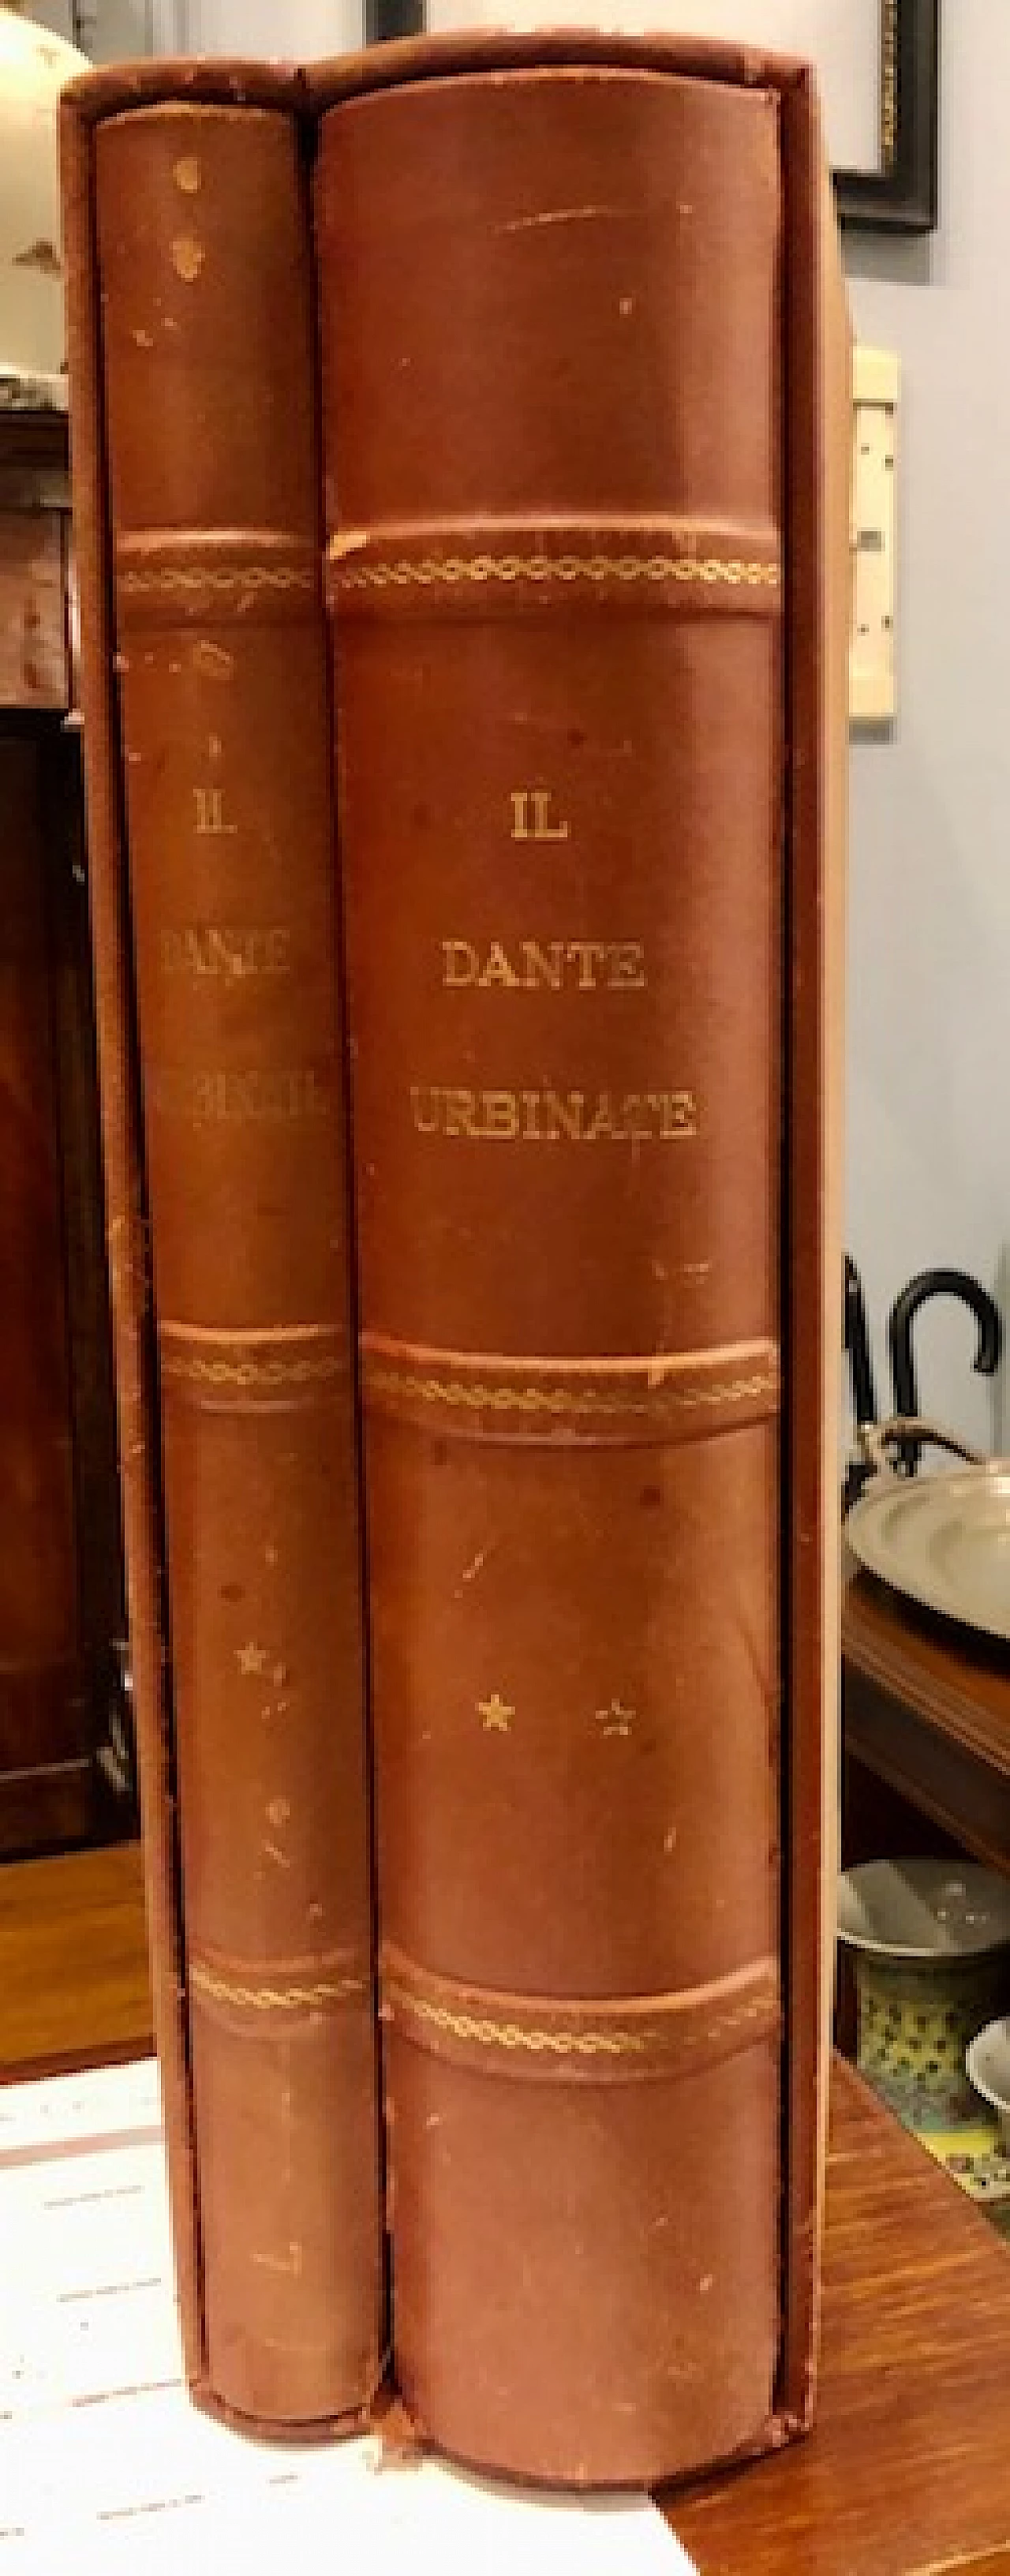 Reproduction of The Dante Urbinate from The Vatican Library 5